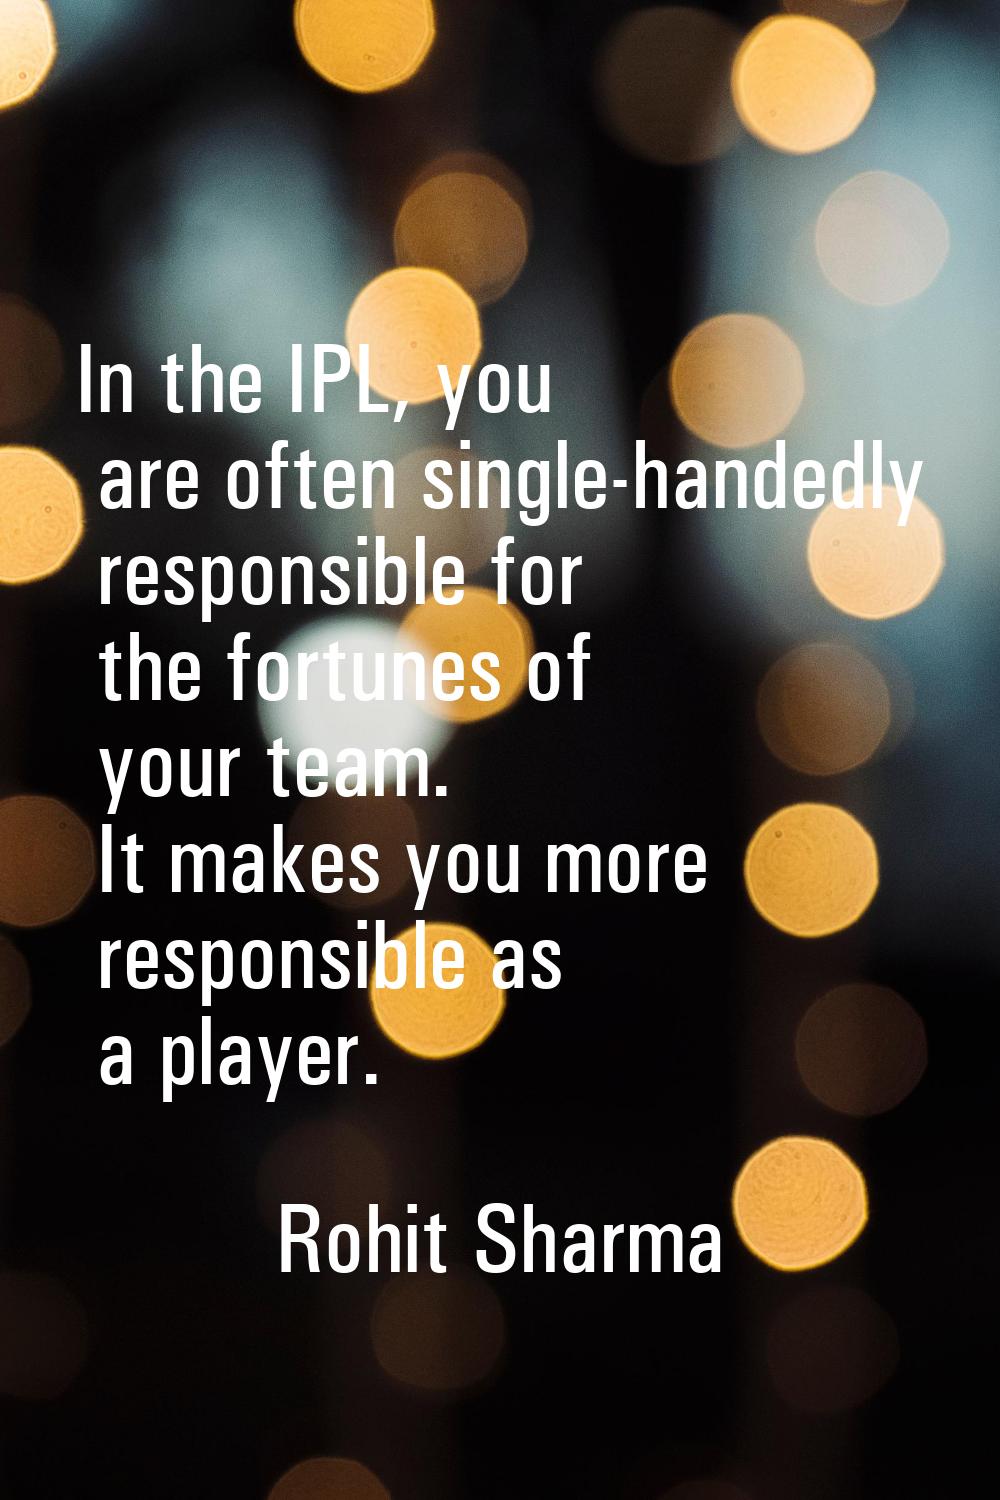 In the IPL, you are often single-handedly responsible for the fortunes of your team. It makes you m